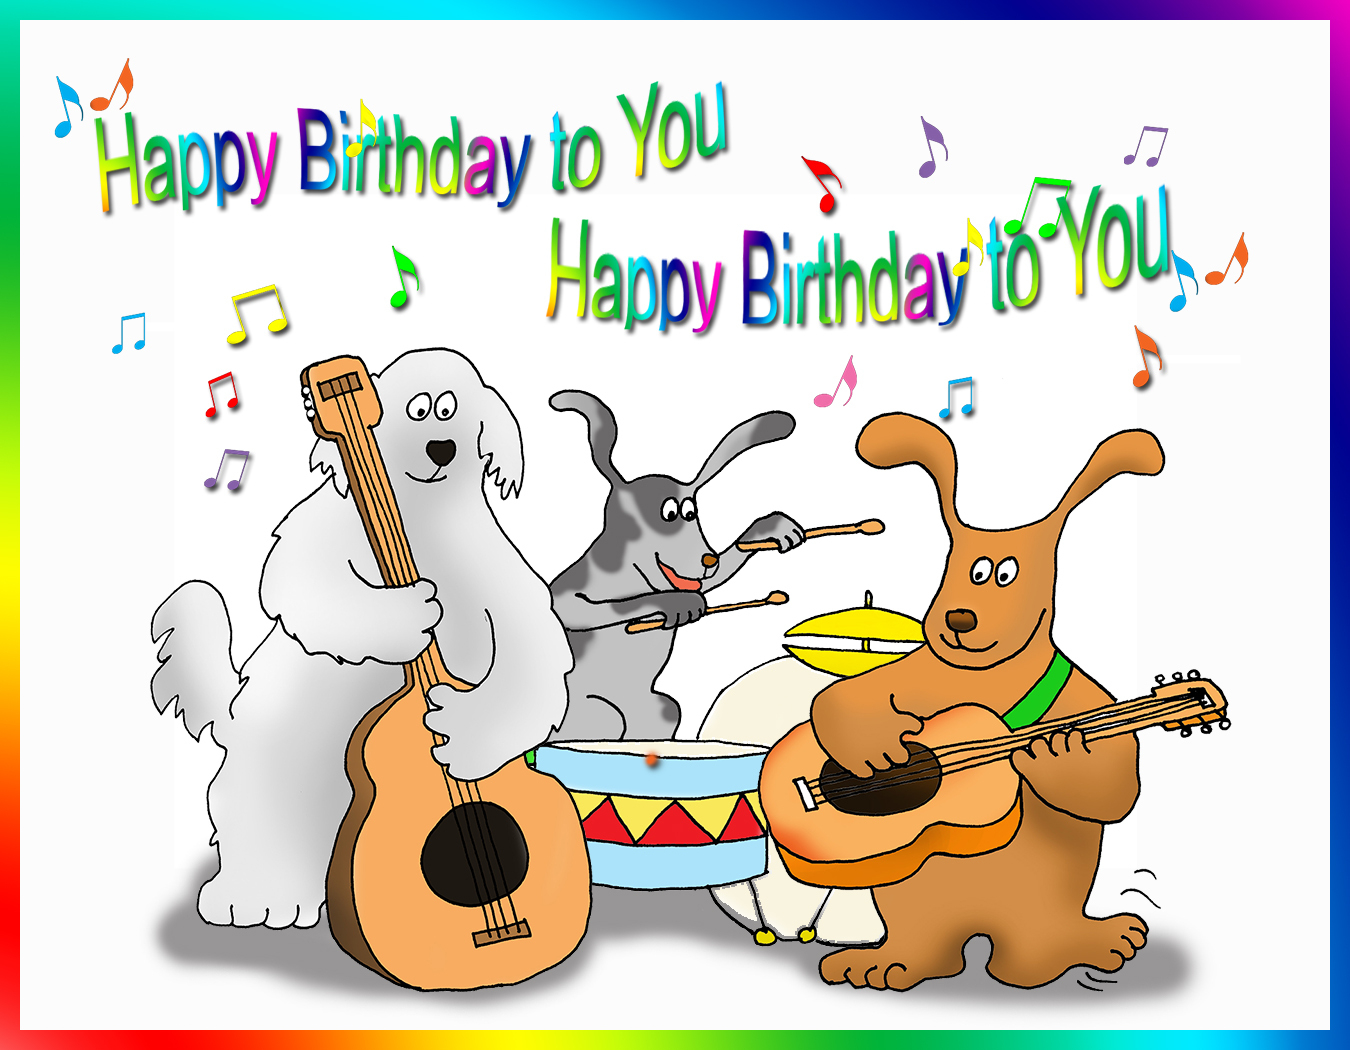 Happy Birthday Card For You – Free Printable Greeting Cards - Free Printable Birthday Cards Guitar